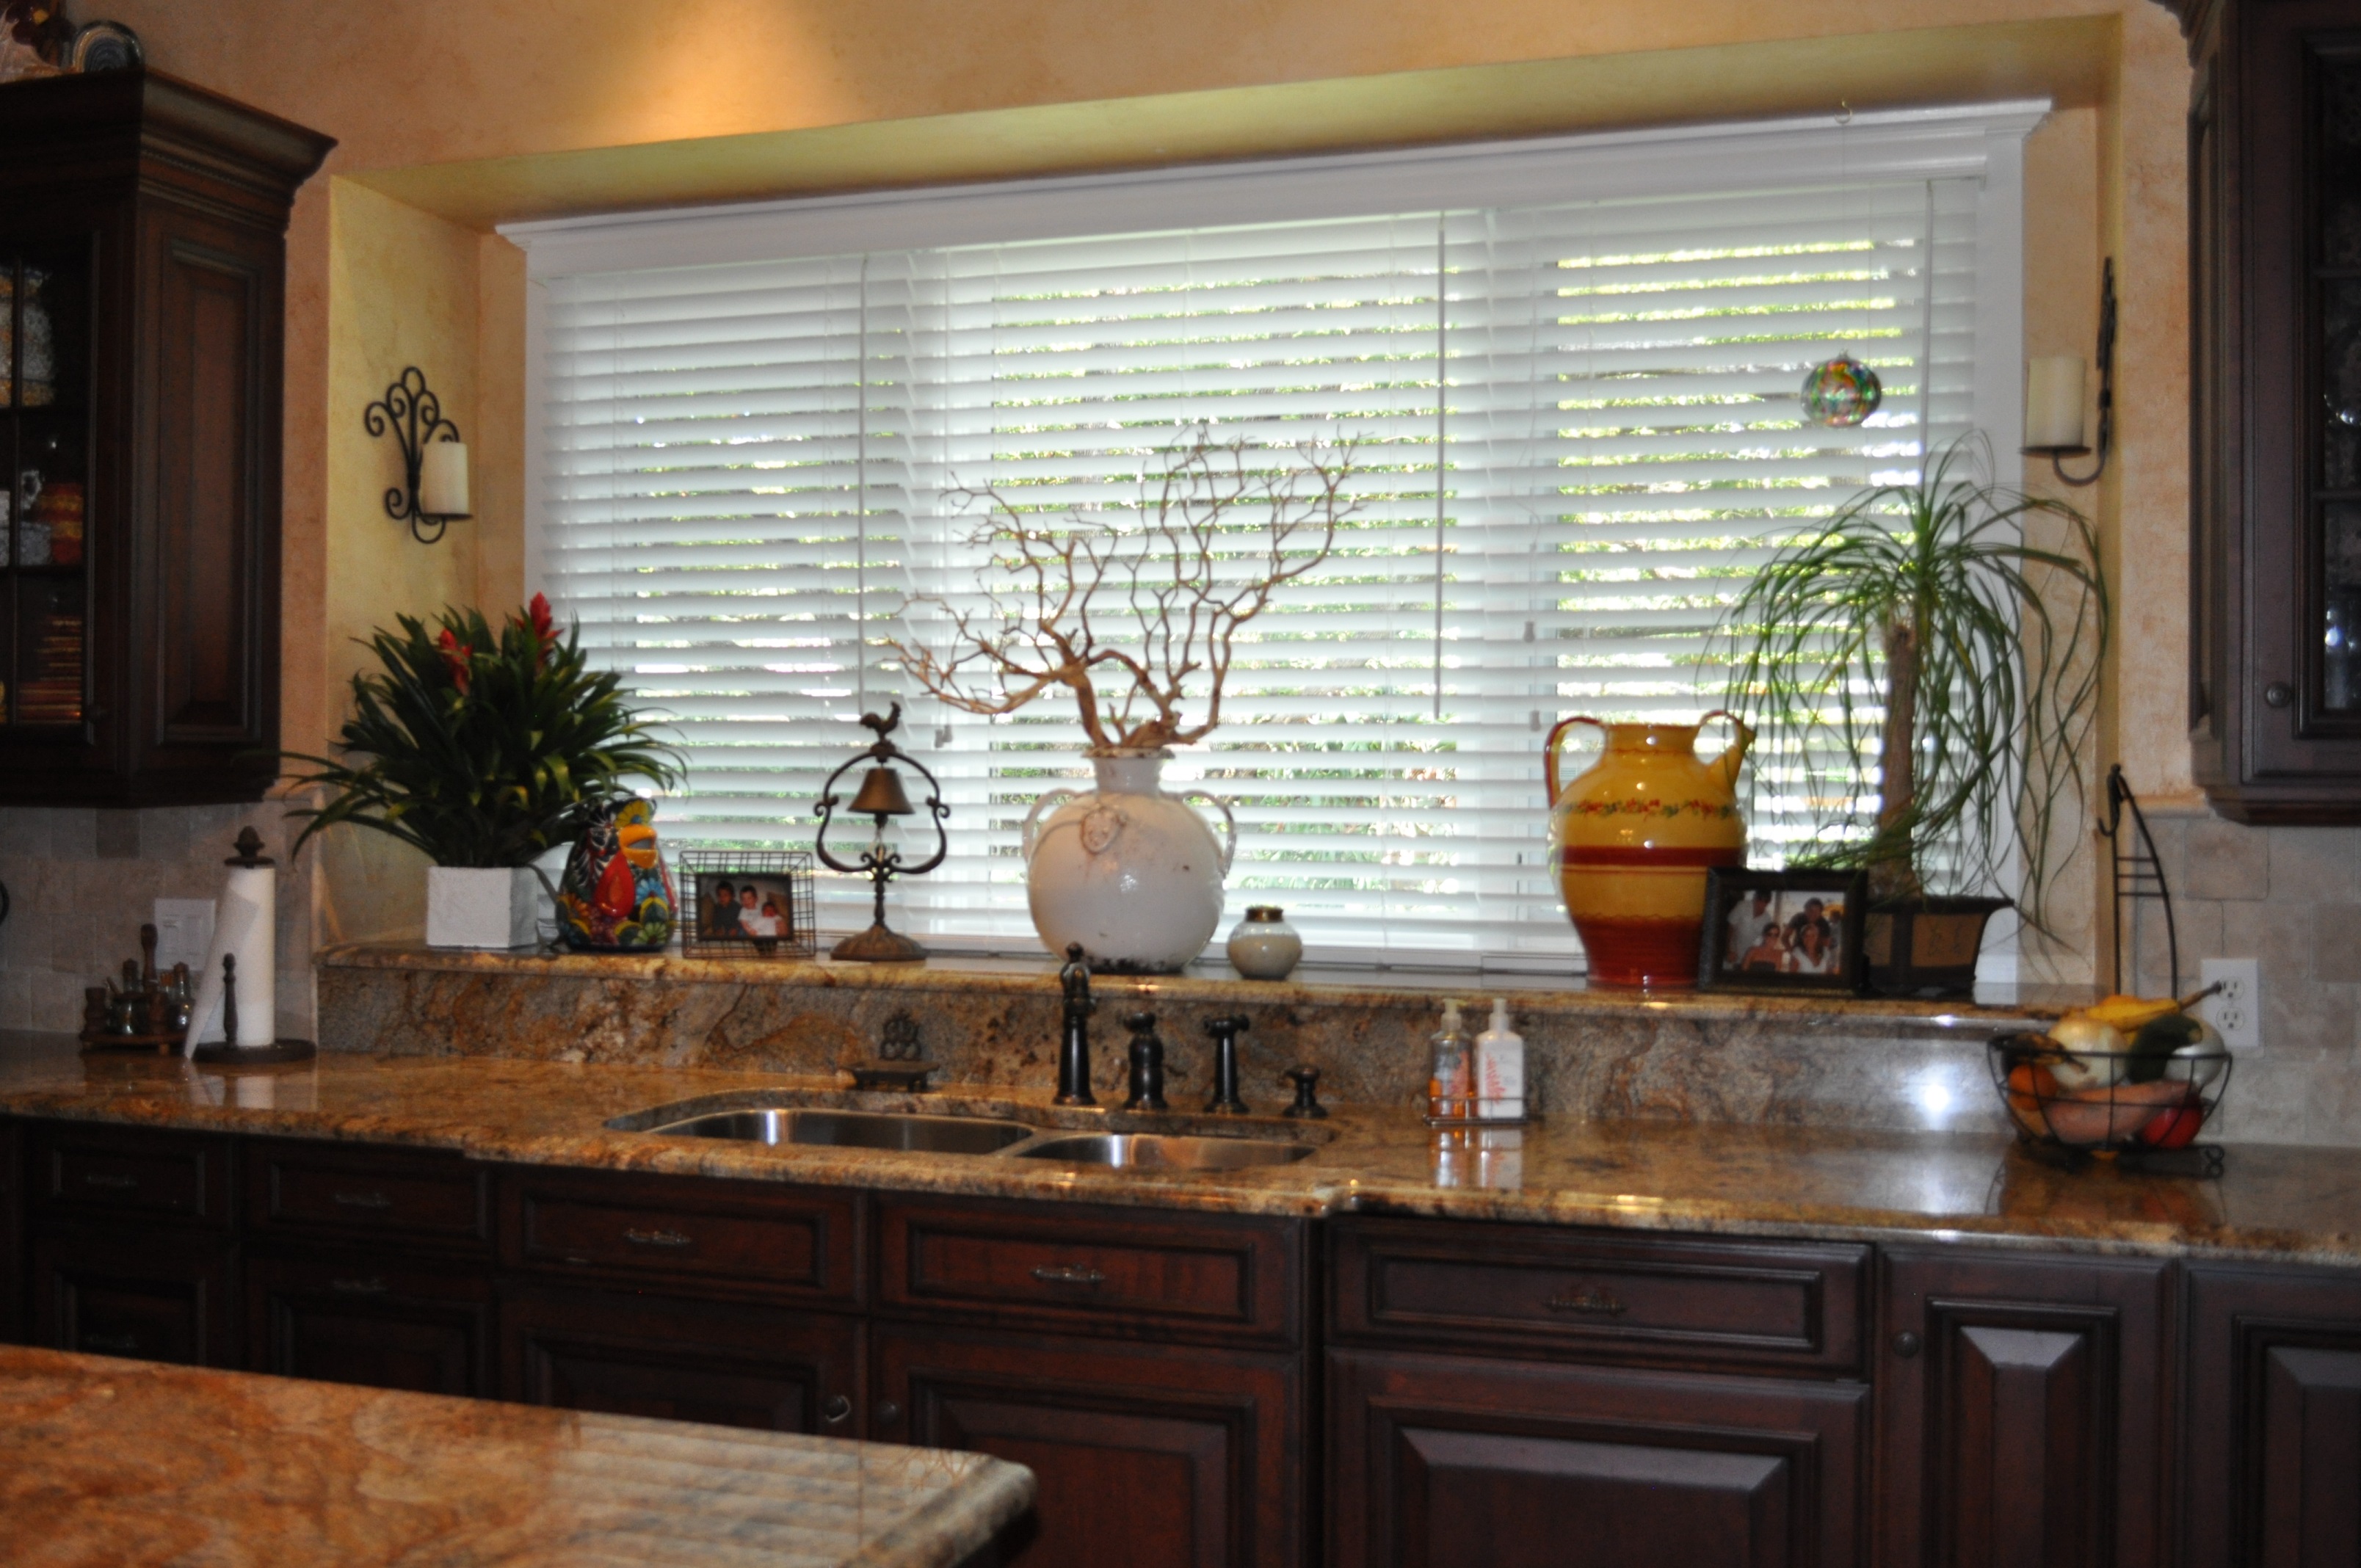 plantation shutters Reunion County, window blinds, roller shades